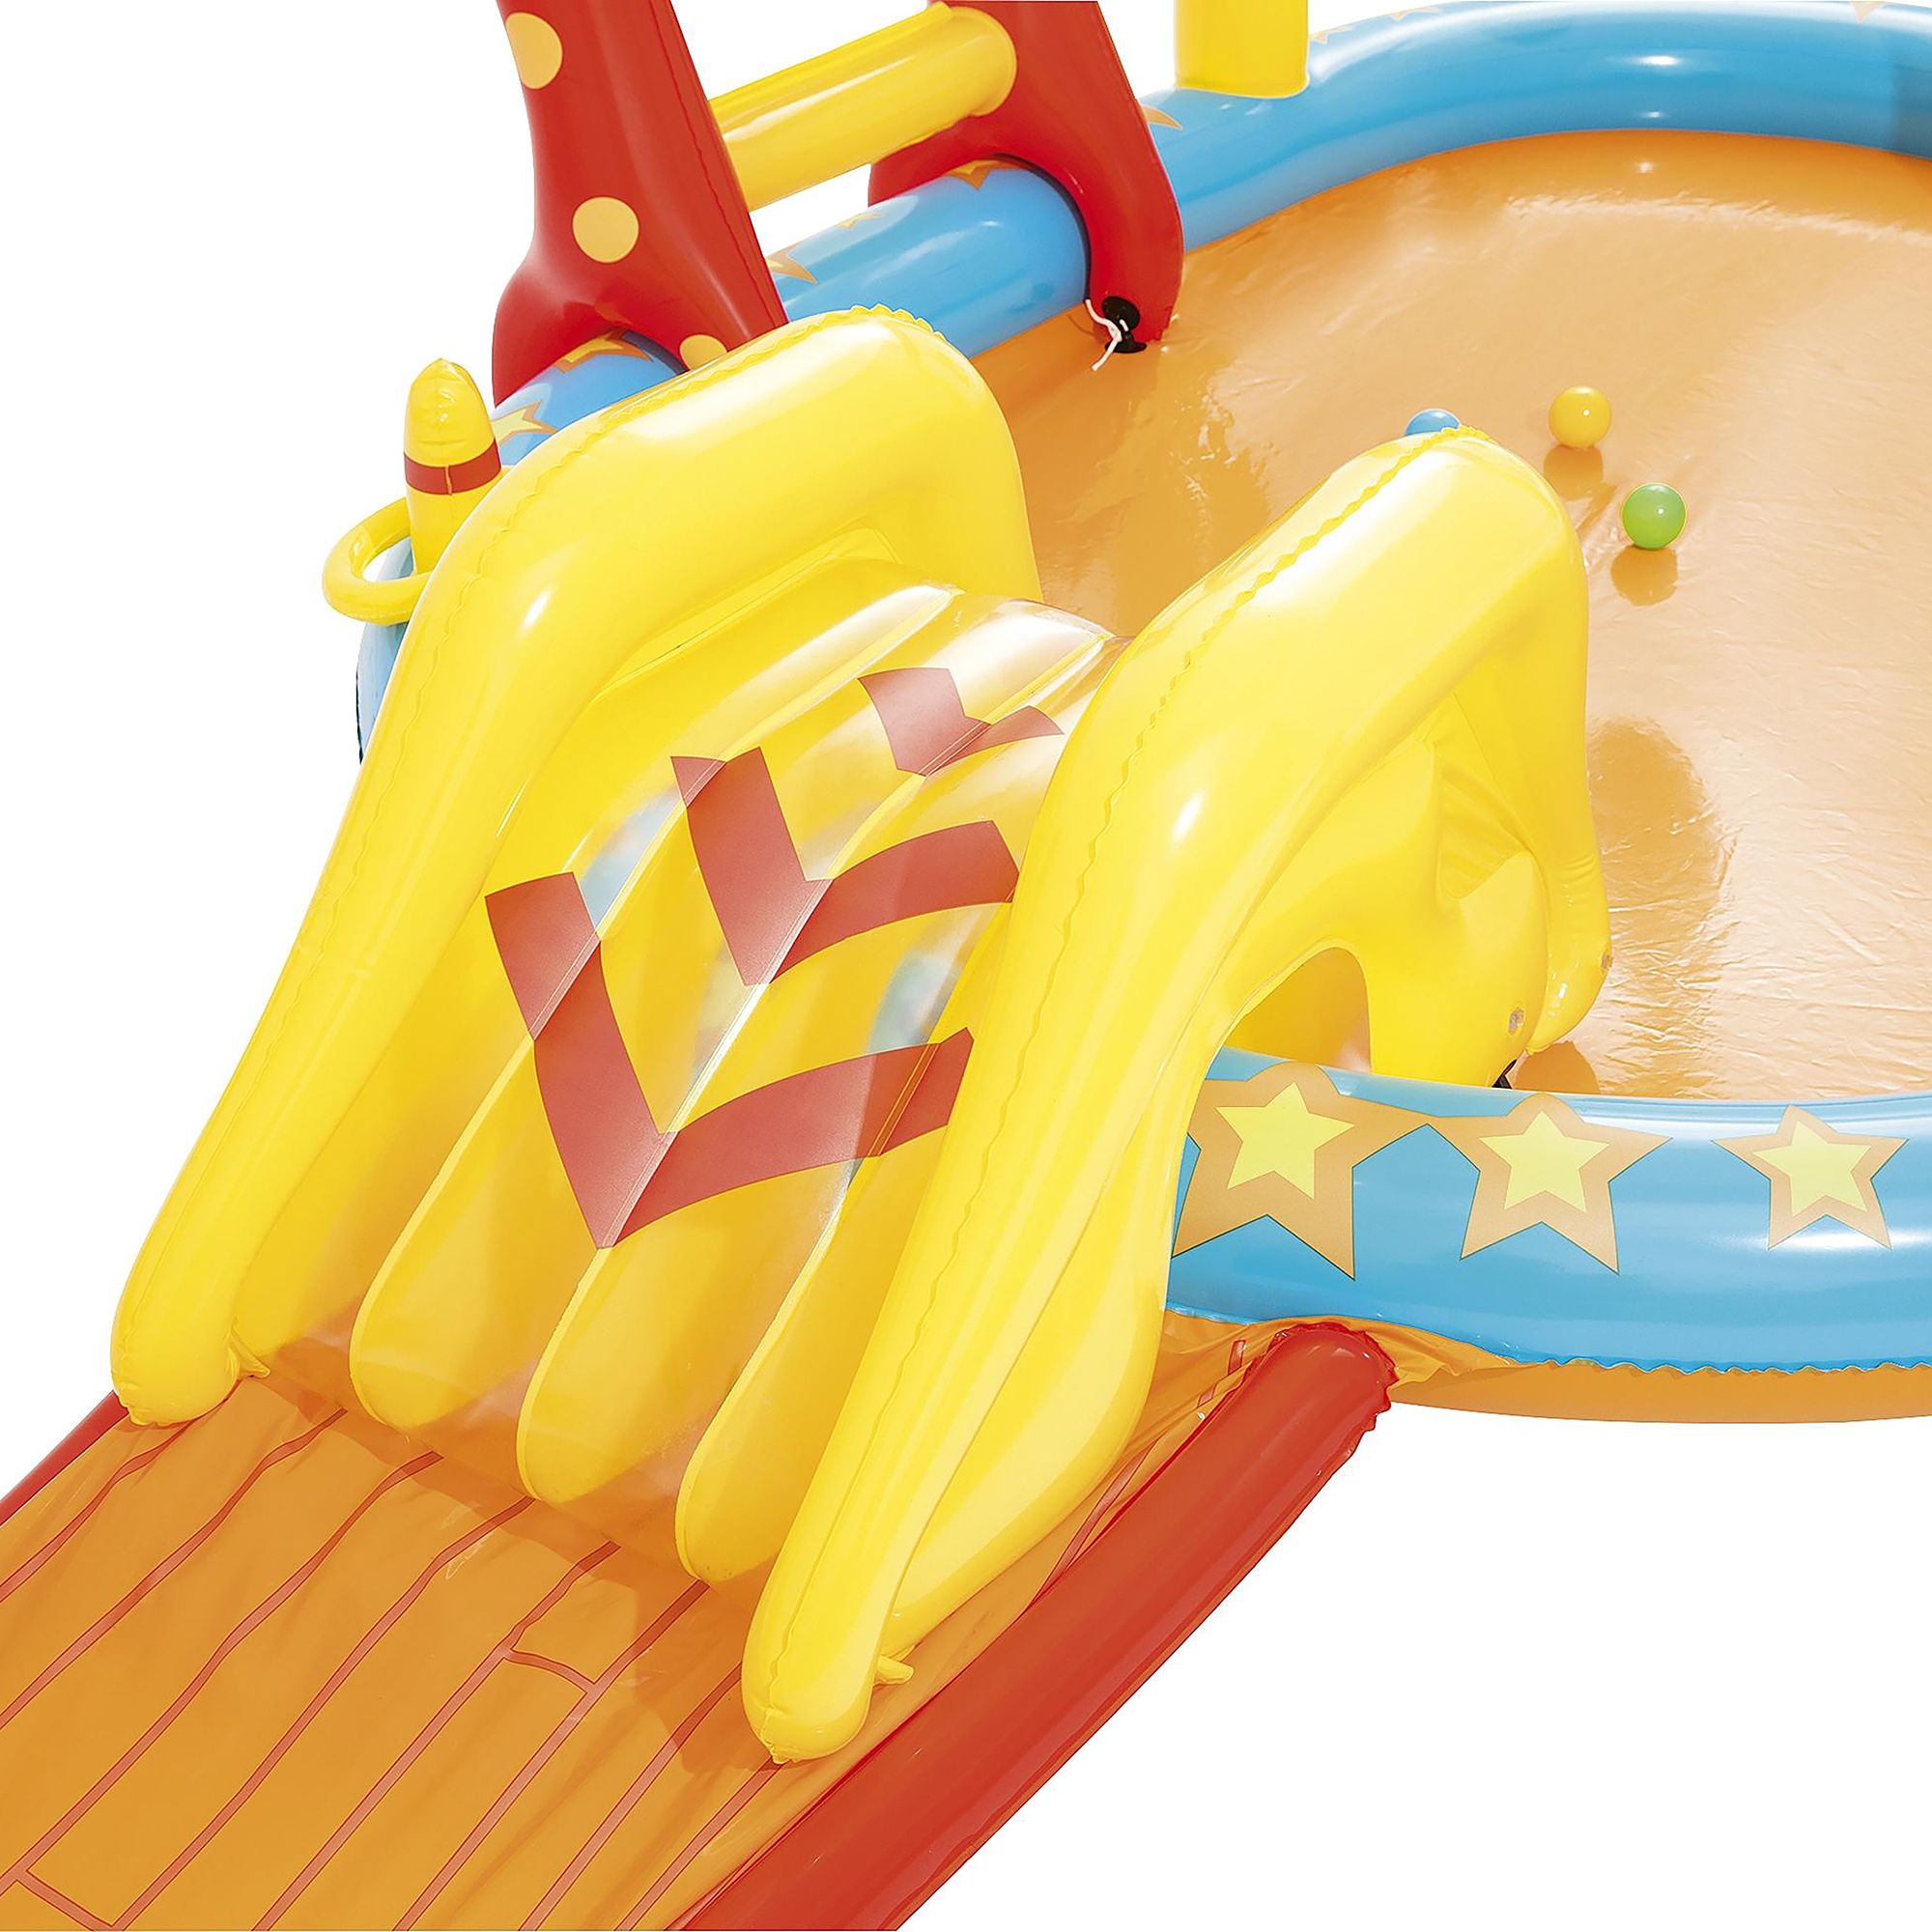 Bestway Multicolour Small Lil' champ Plastic Play centre With slide